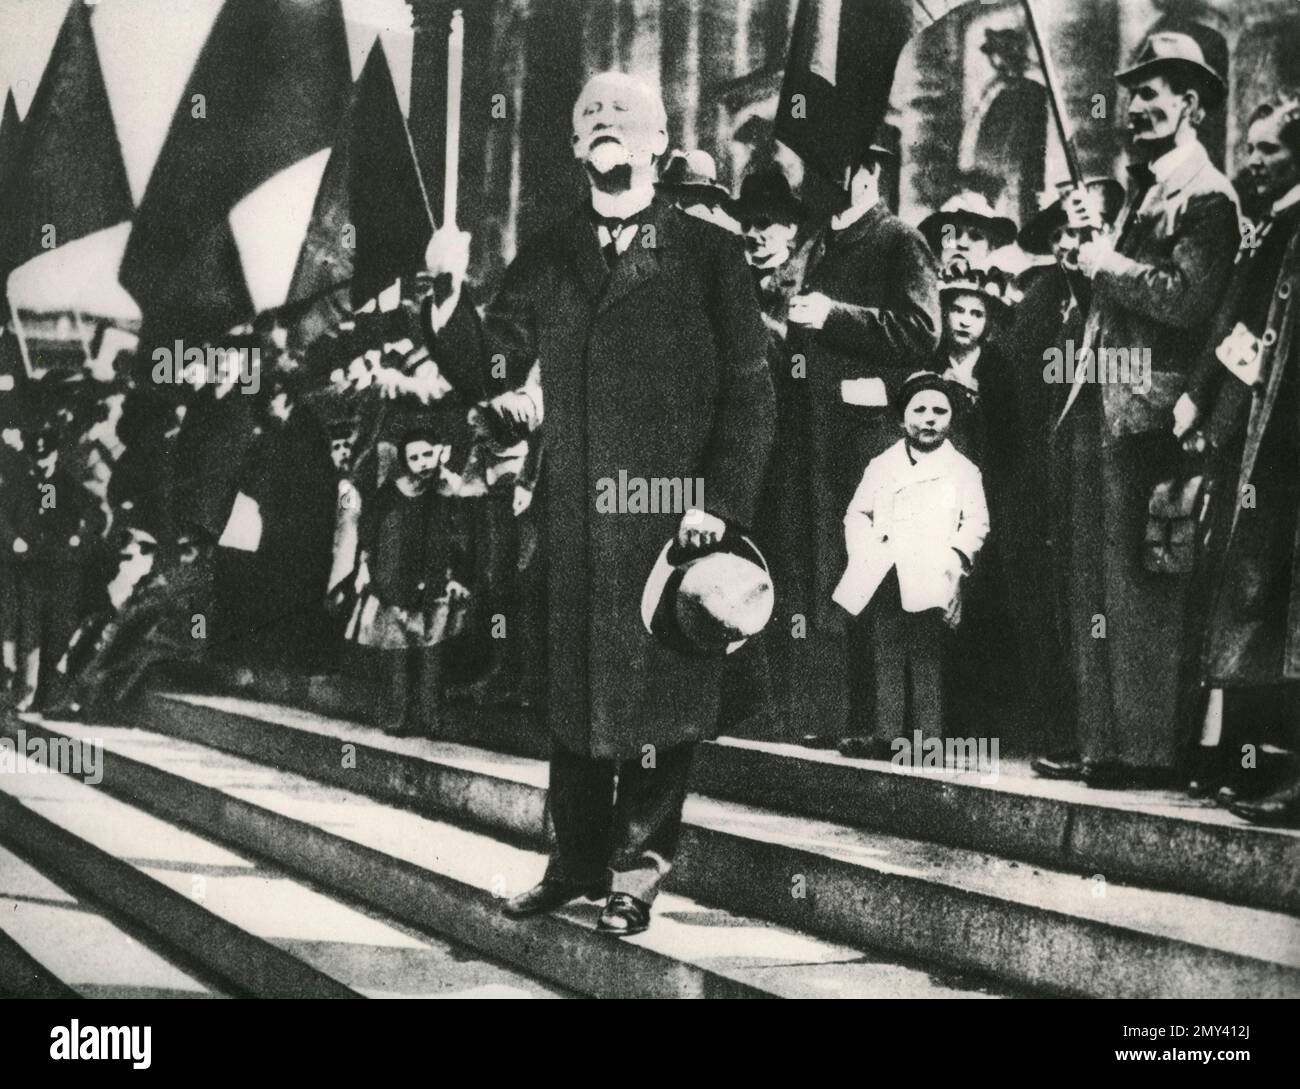 German politician of the Social Democratic Party of Germany Philipp Heinrich Scheidemann at a demonstration, Germany 1930s Stock Photo